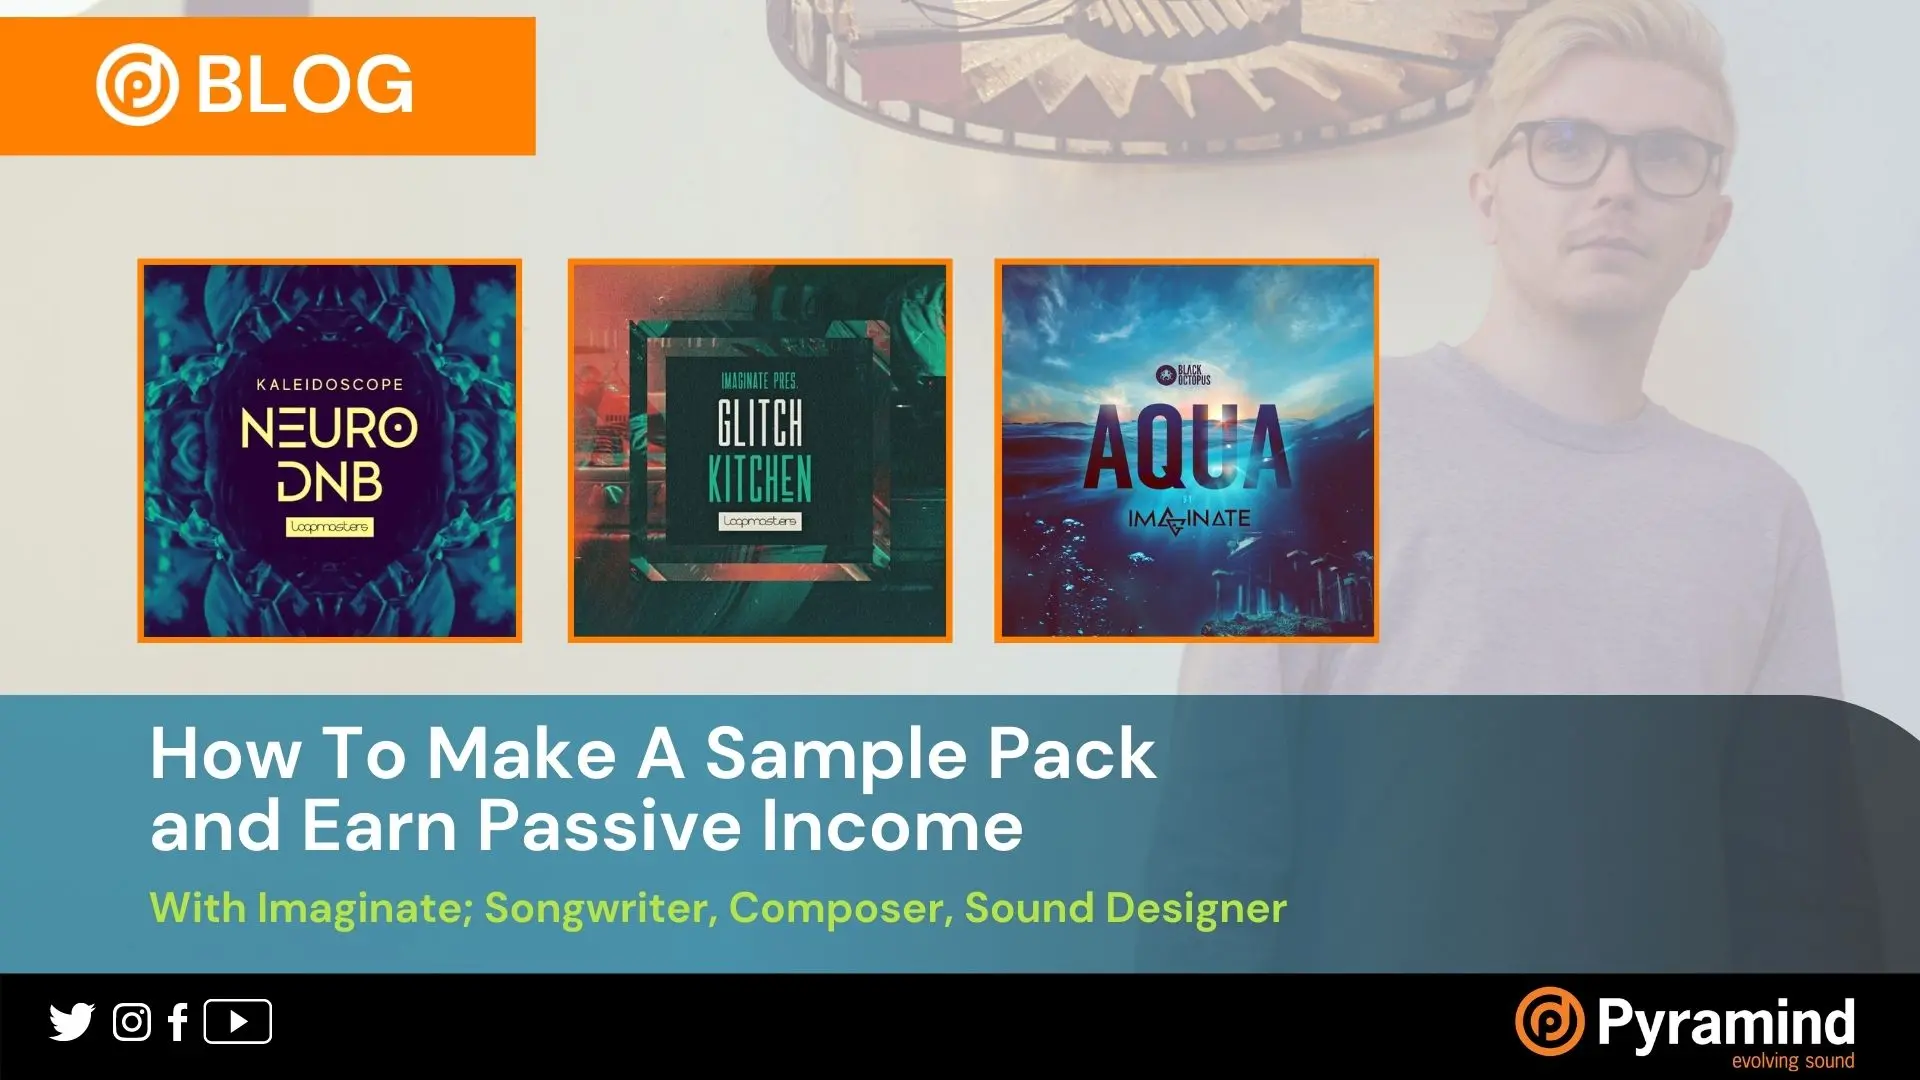 How to make a sample pack with Imaginate